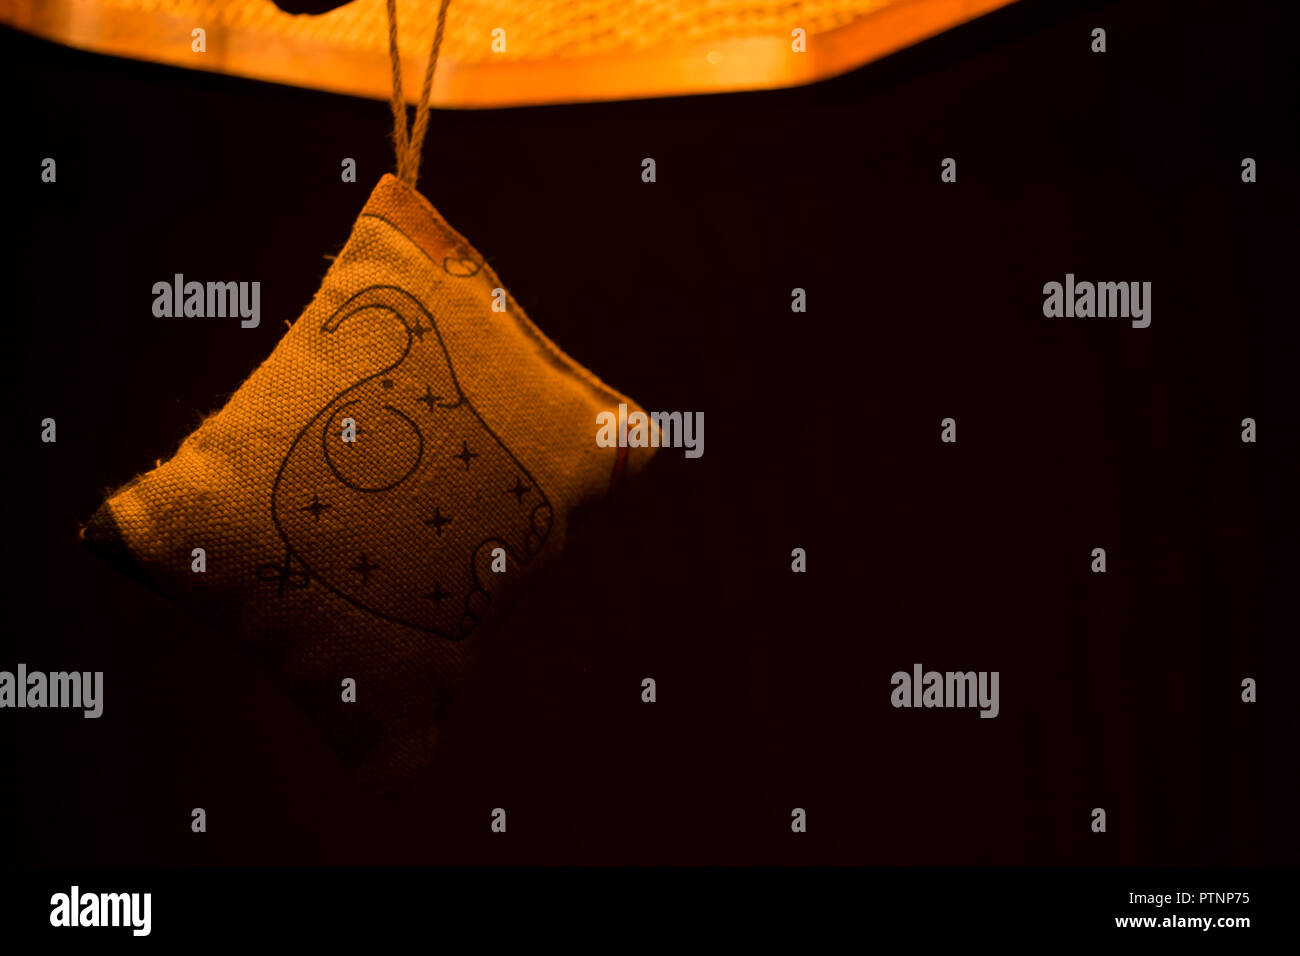 Abstract photto of hanging ornament in the warm light Stock Photo